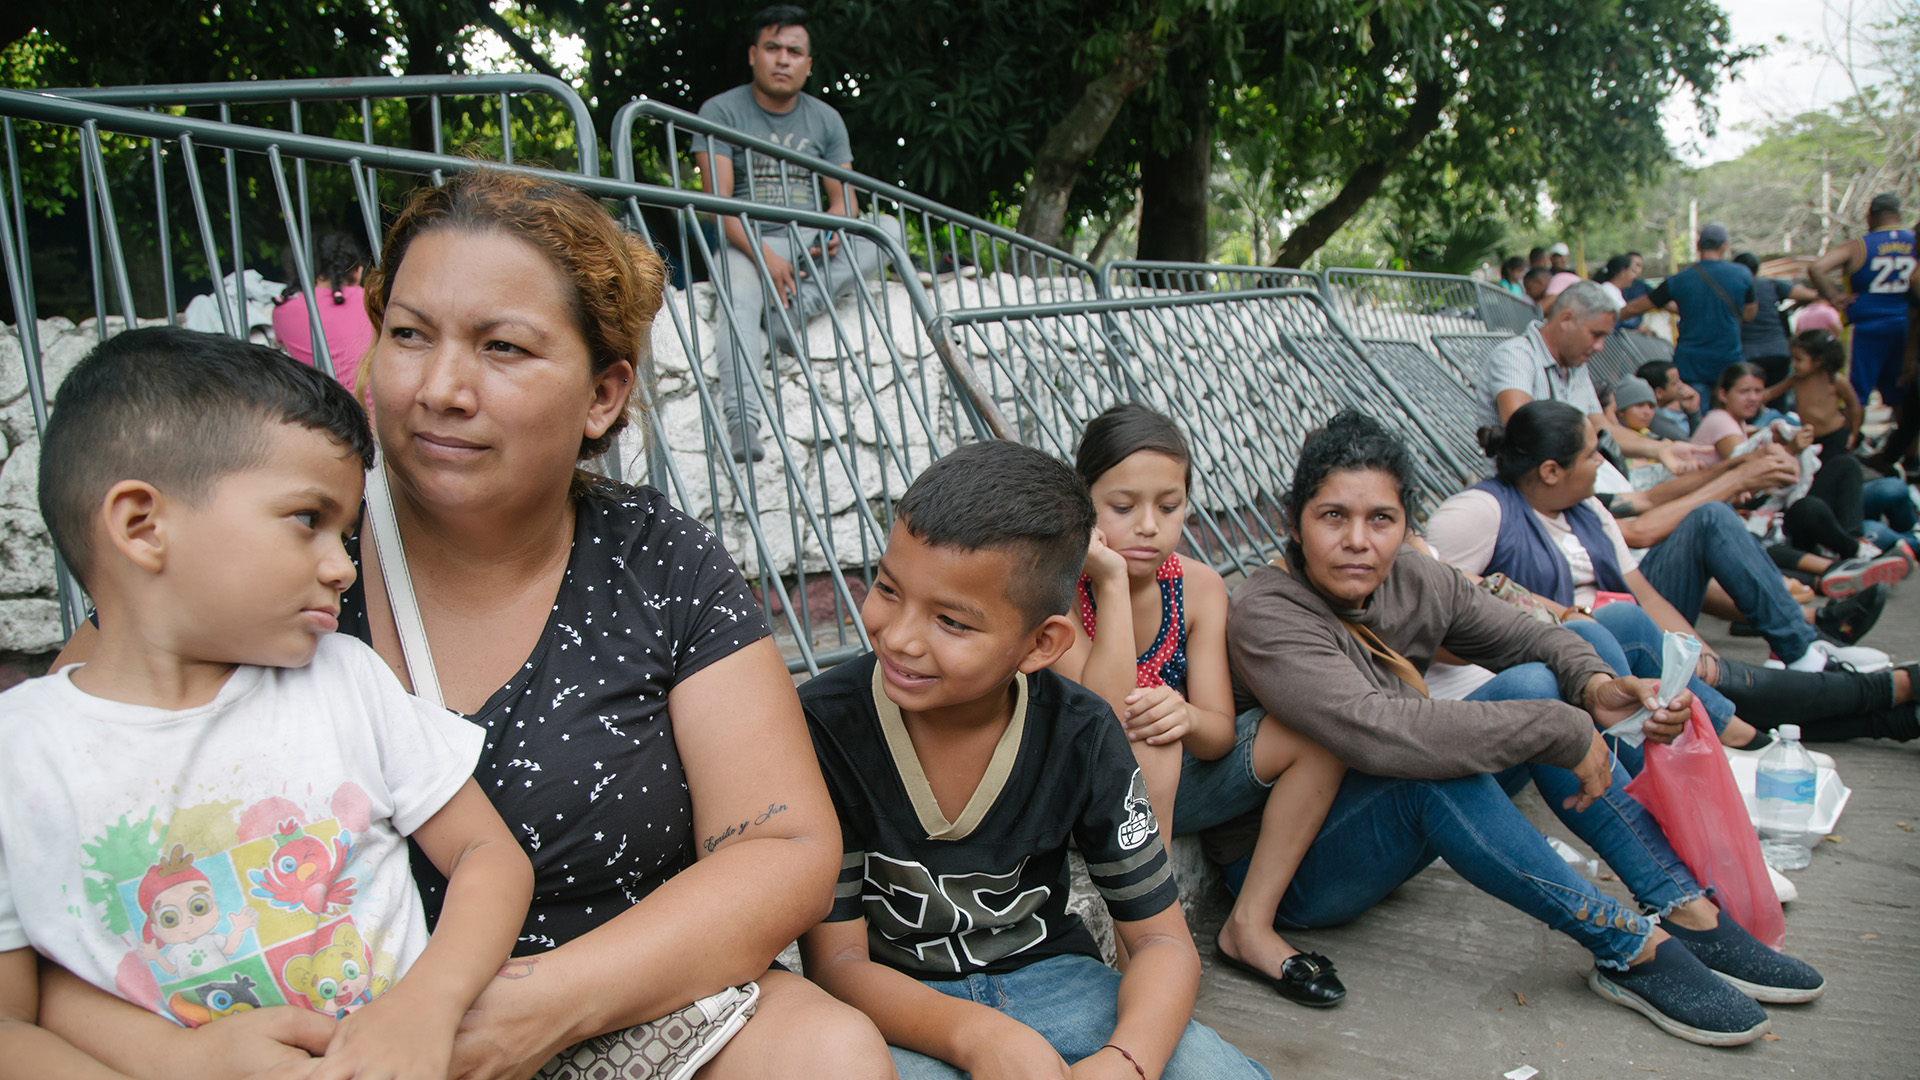 Claudia, a refugee from Honduras, is seen here with her son Ian and Luis Emilio at the new COMAR (Mexican Commission to Assist Refugees) site in Tapachula, Mexico, on September 11, 2023. These individuals endure lengthy waits, often necessitating overnight stays in line, as they await appointments for humanitarian visas after fleeing Honduras.